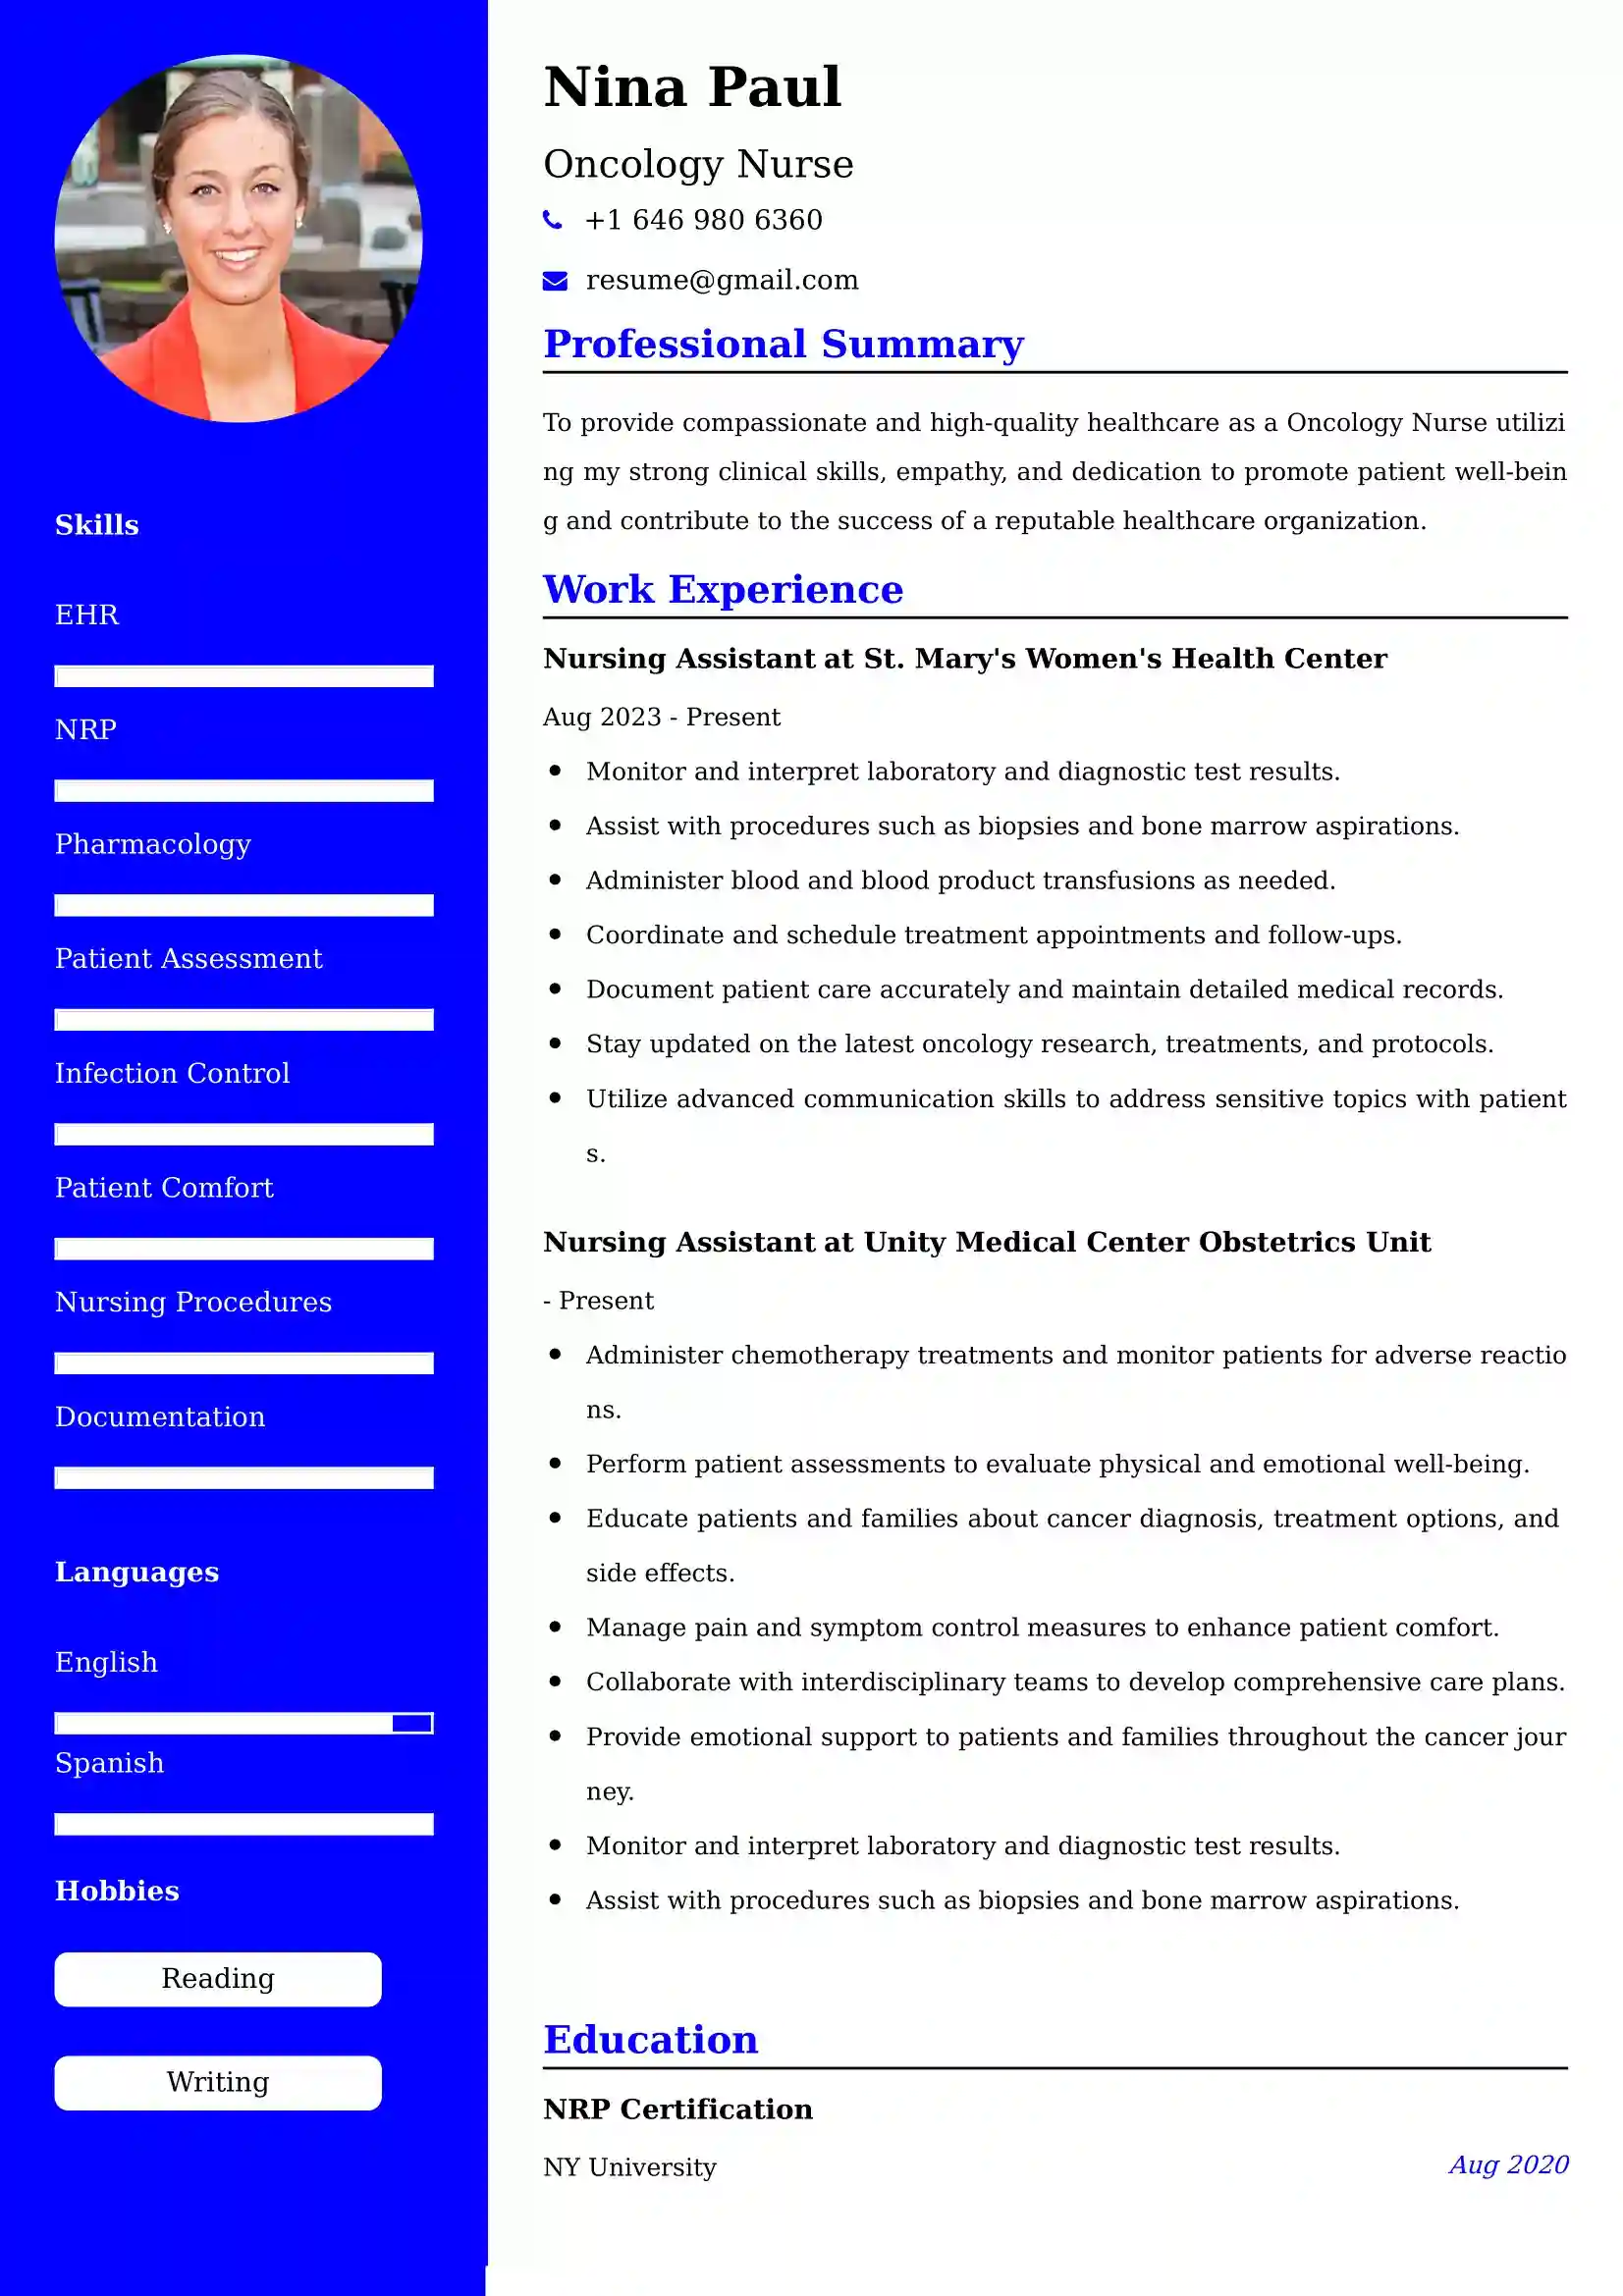 Oncology Nurse Resume Examples - Brazilian Format, Latest Template